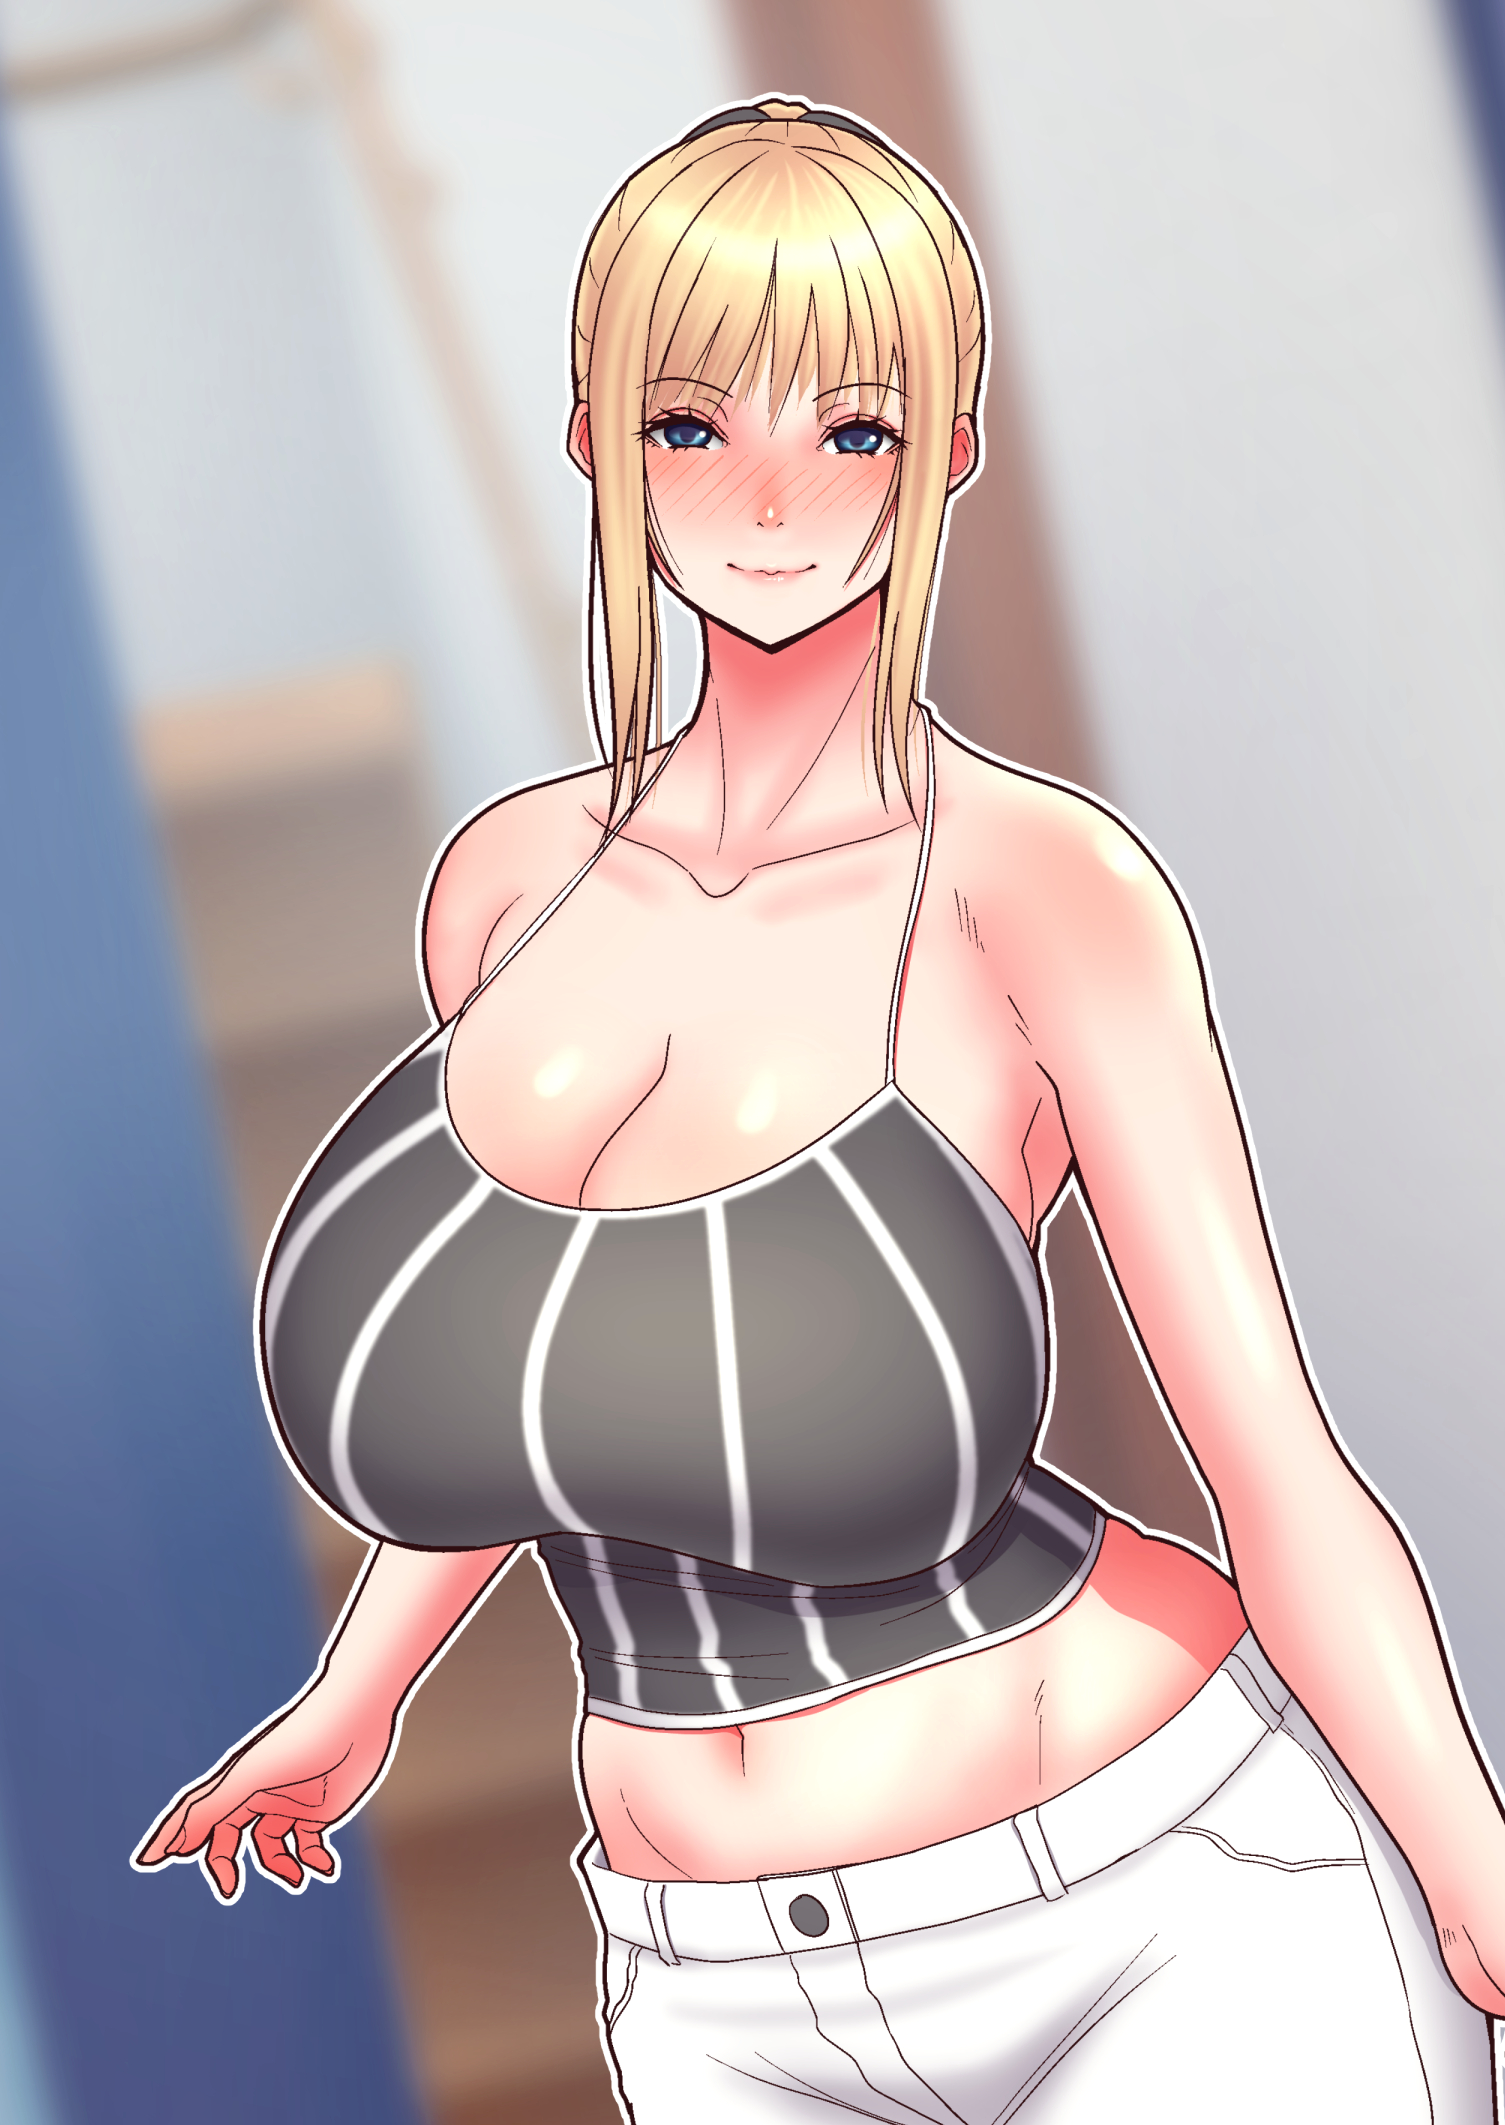 Busty blonde teacher uses her huge tits to give a boobjob in sex comics pic image